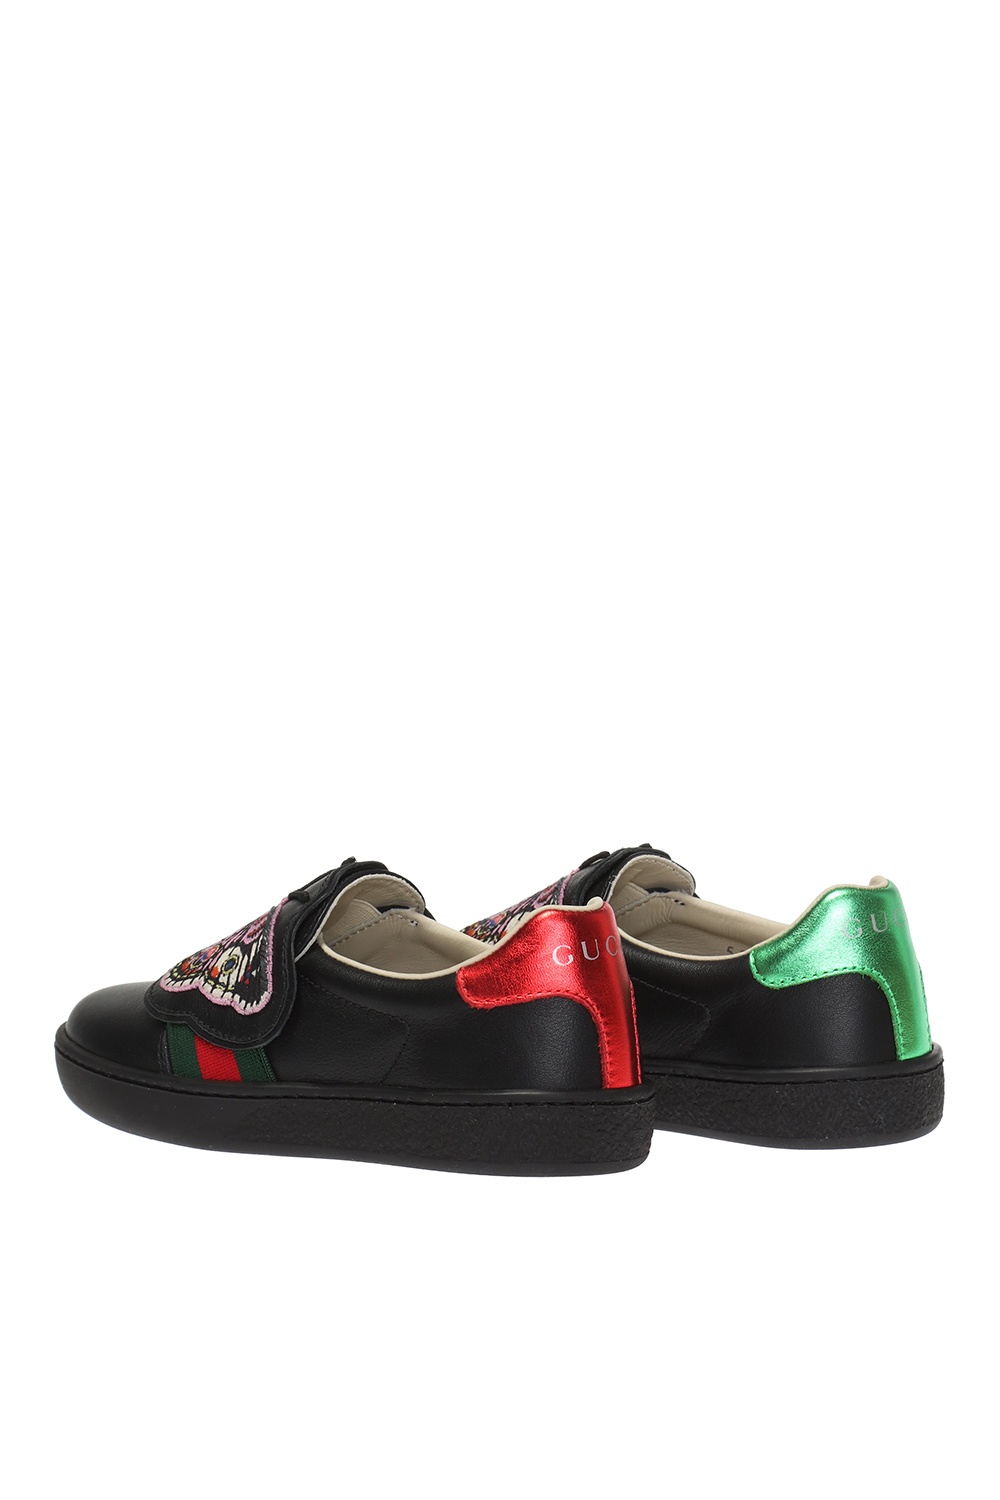 butterfly gucci shoes